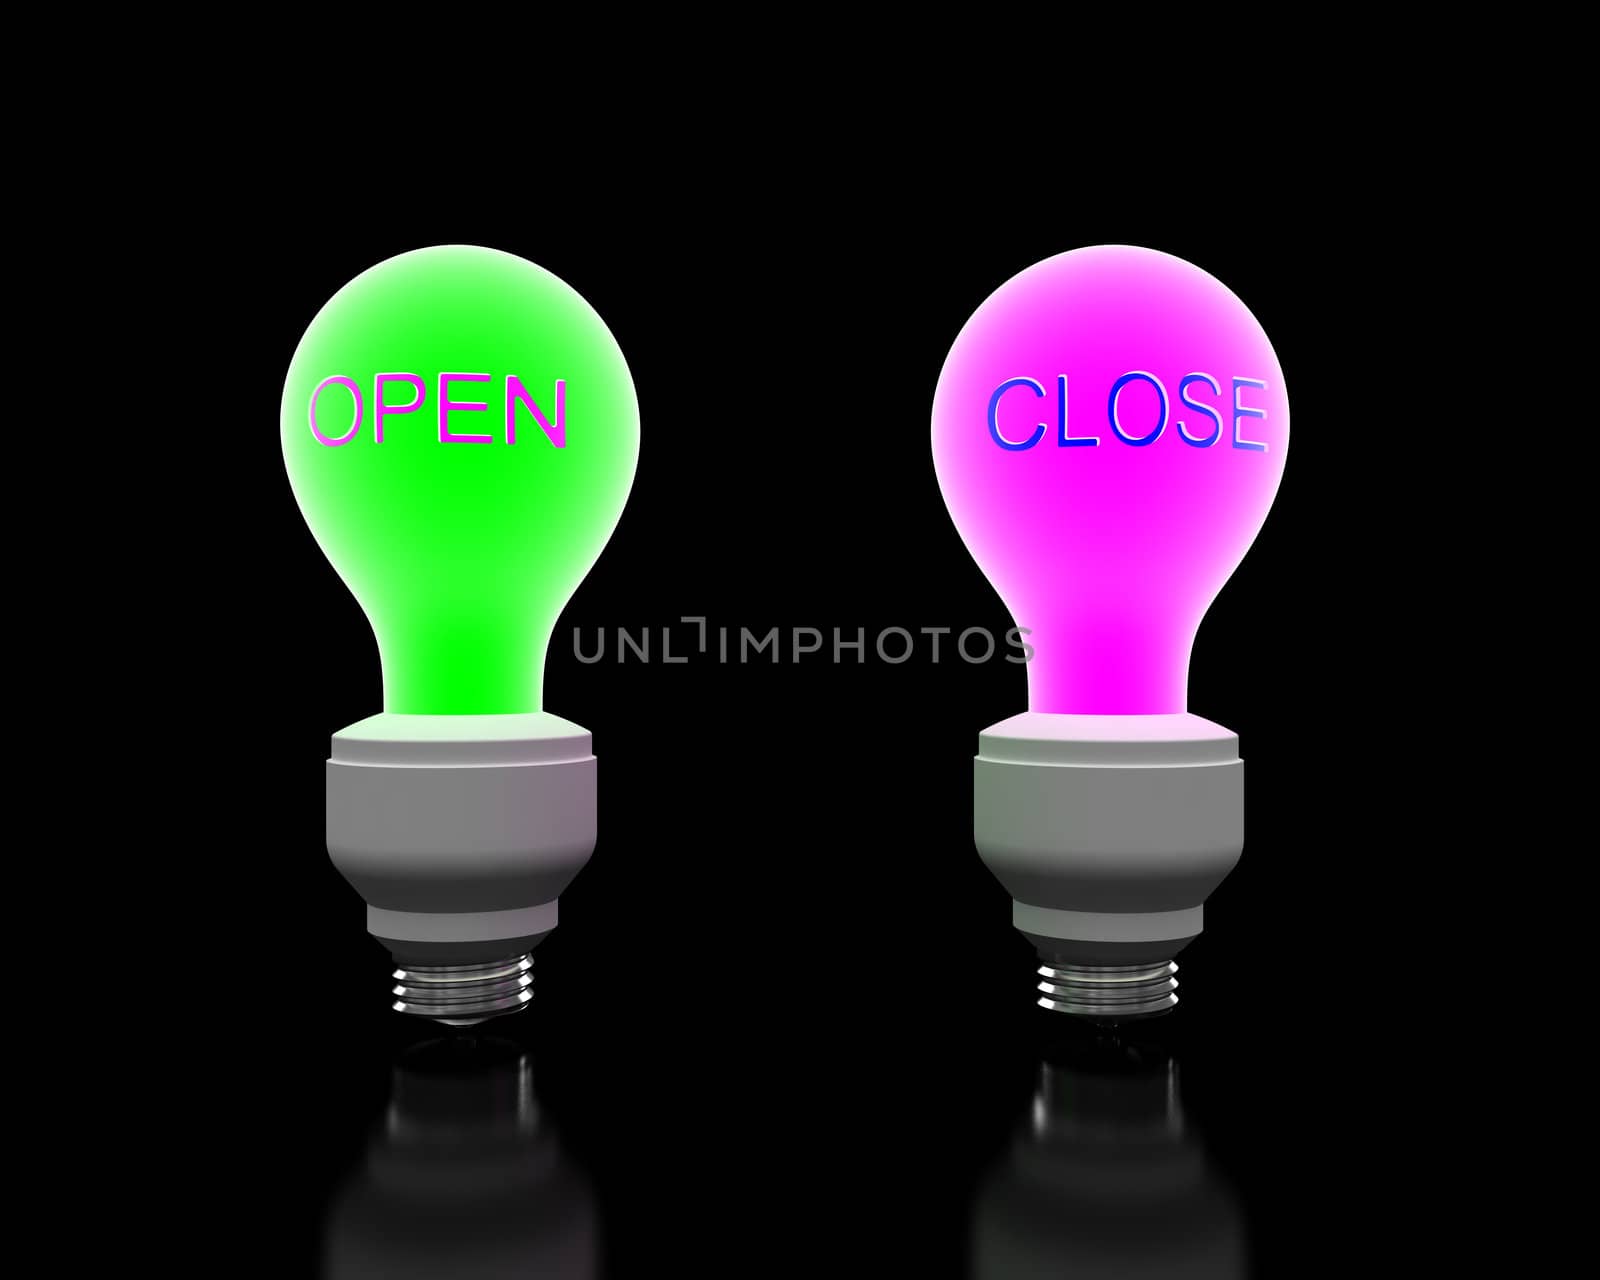 "Open" and "Close" glowing lightbulb by aleksan